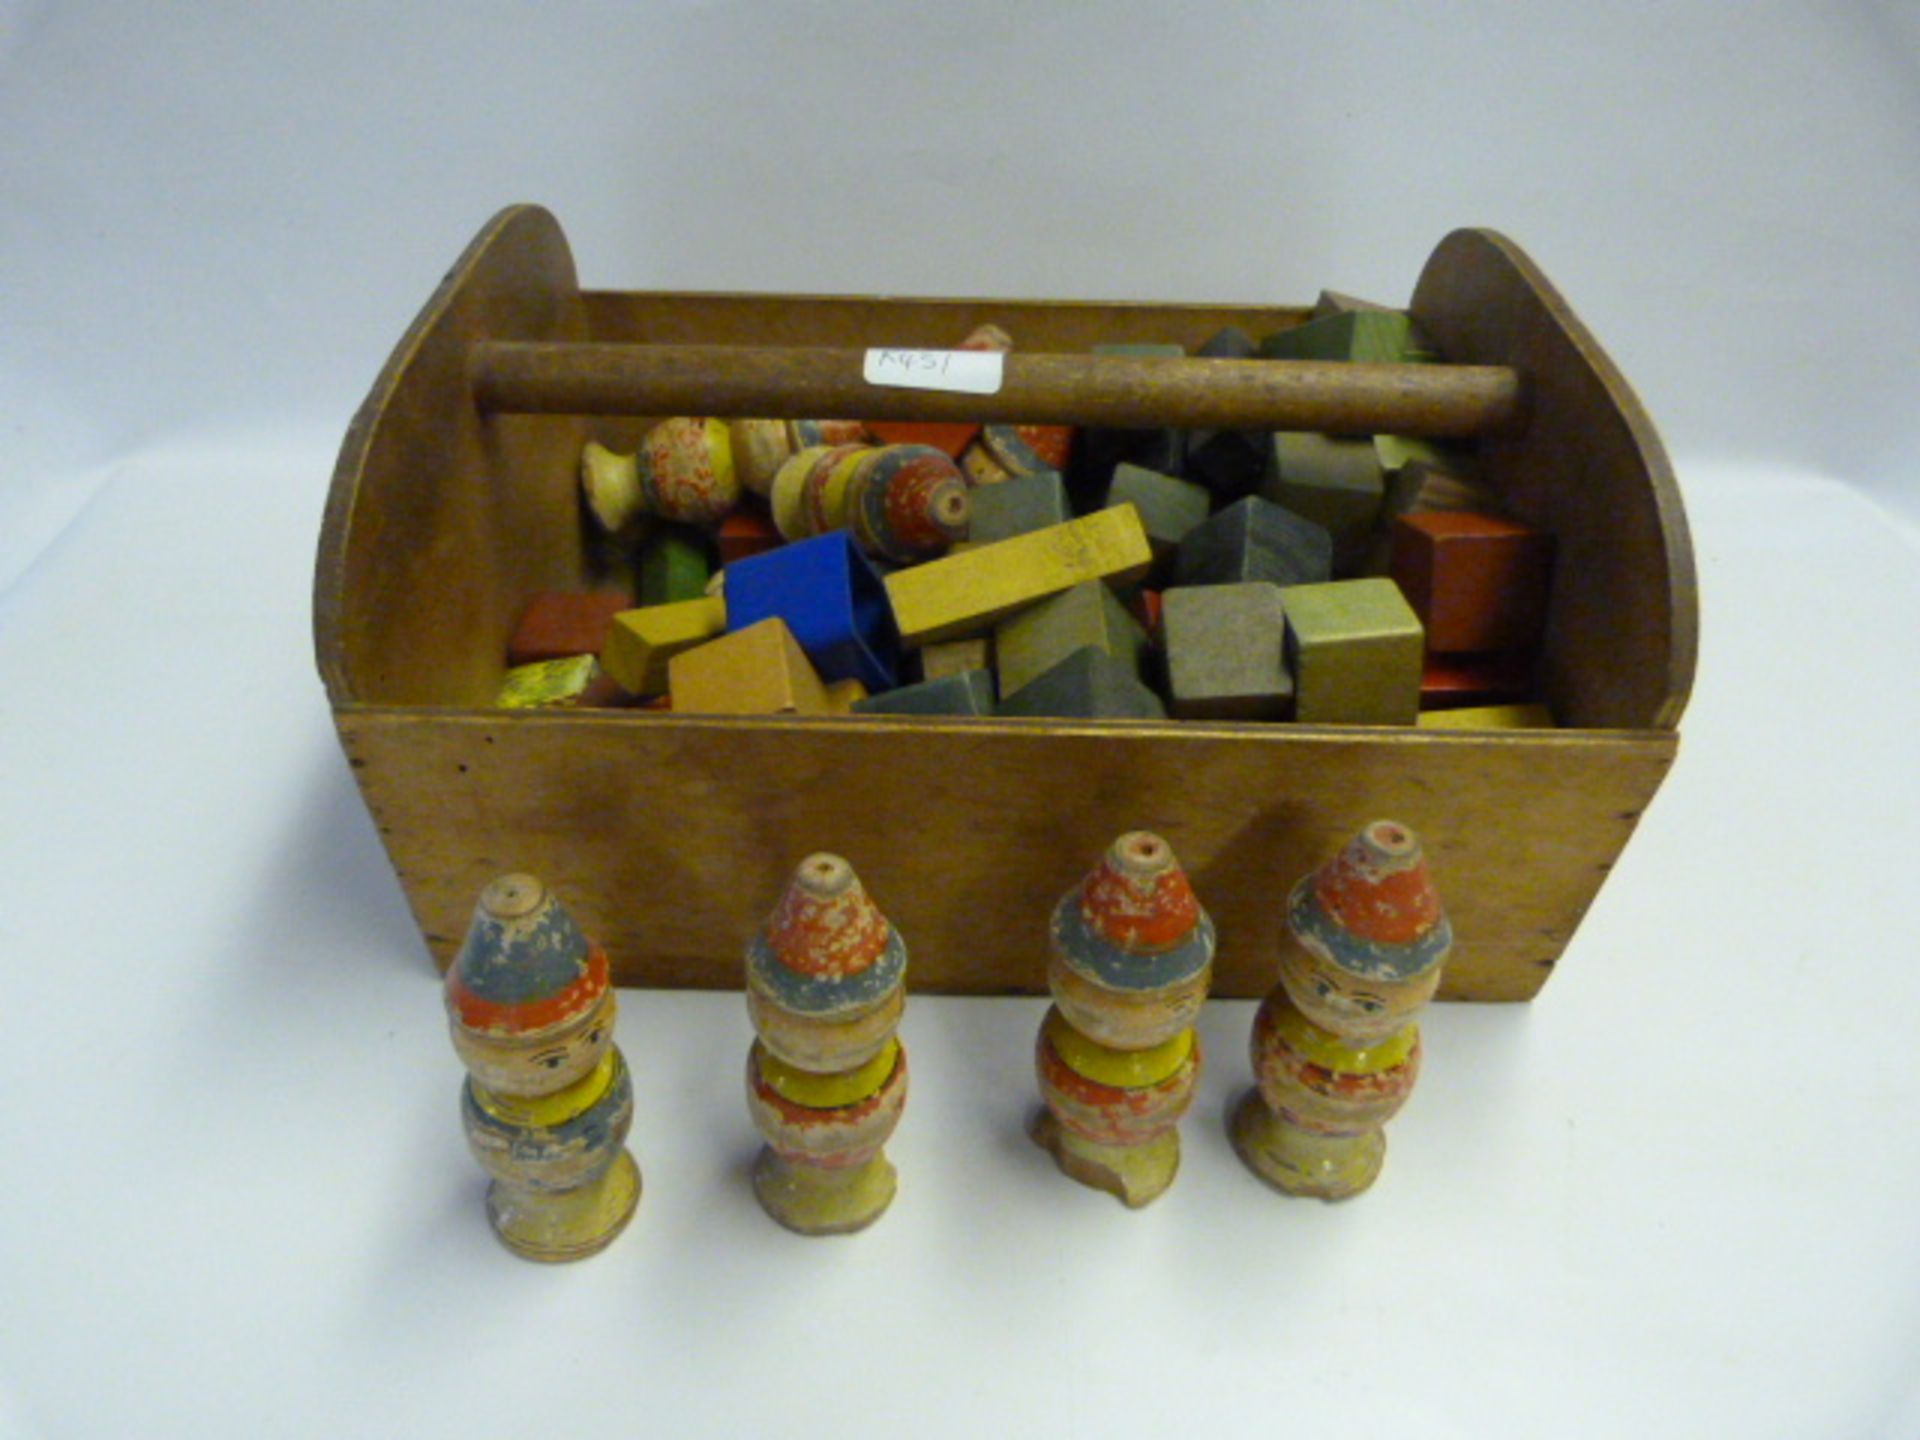 Wooden Toy Blocks and Skittles